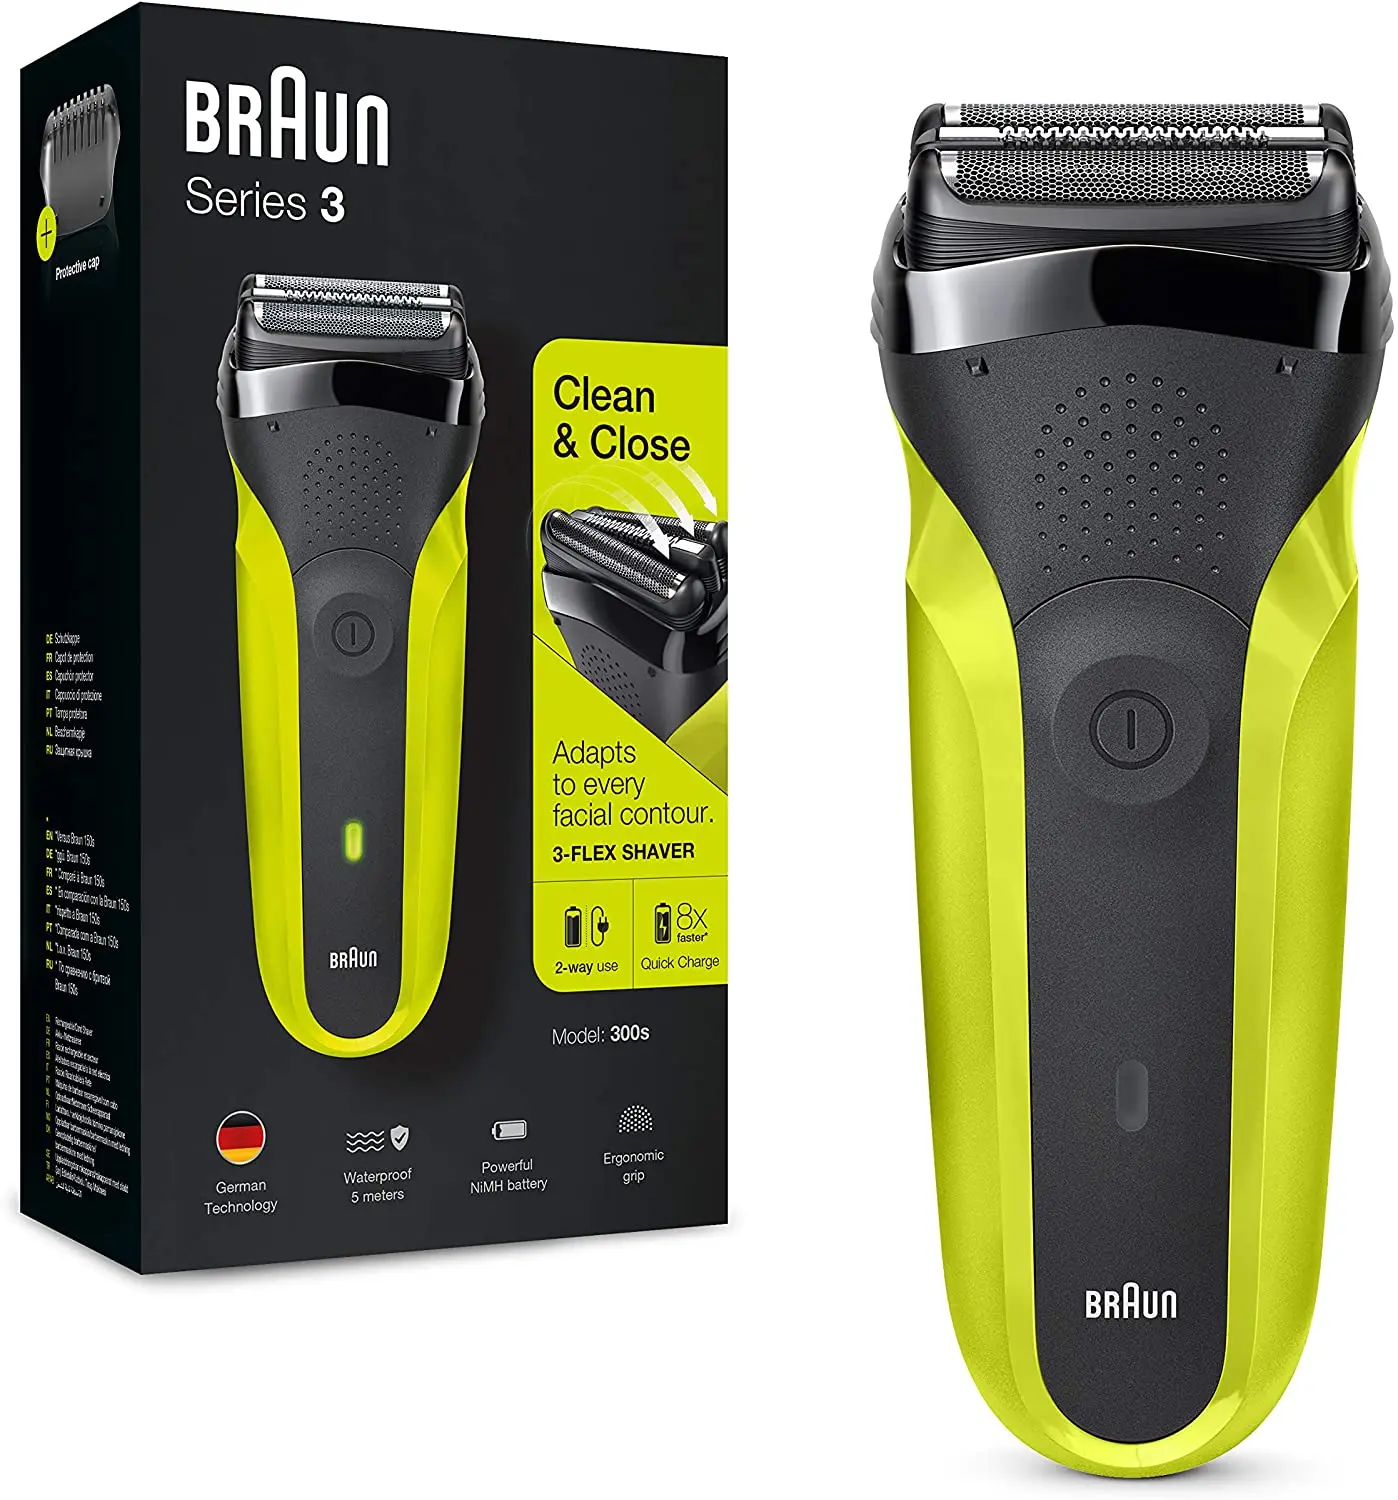 

Braun Series 3 300 Electric Shaver, Men's Razor with 3 Flexible Blades, Rechargeable, Cordless, Washable, Black / Green Color